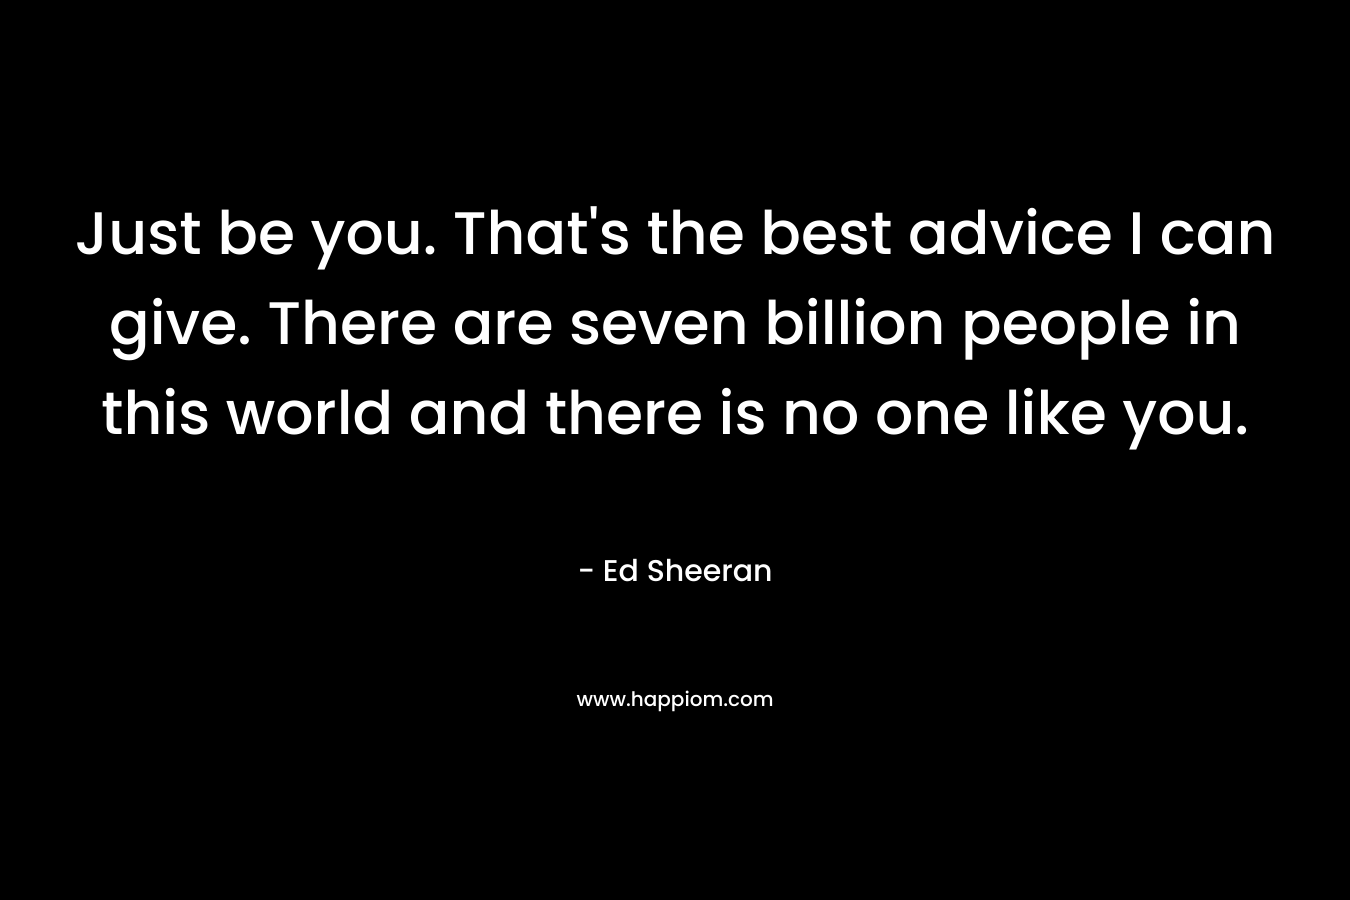 Just be you. That’s the best advice I can give. There are seven billion people in this world and there is no one like you. – Ed Sheeran